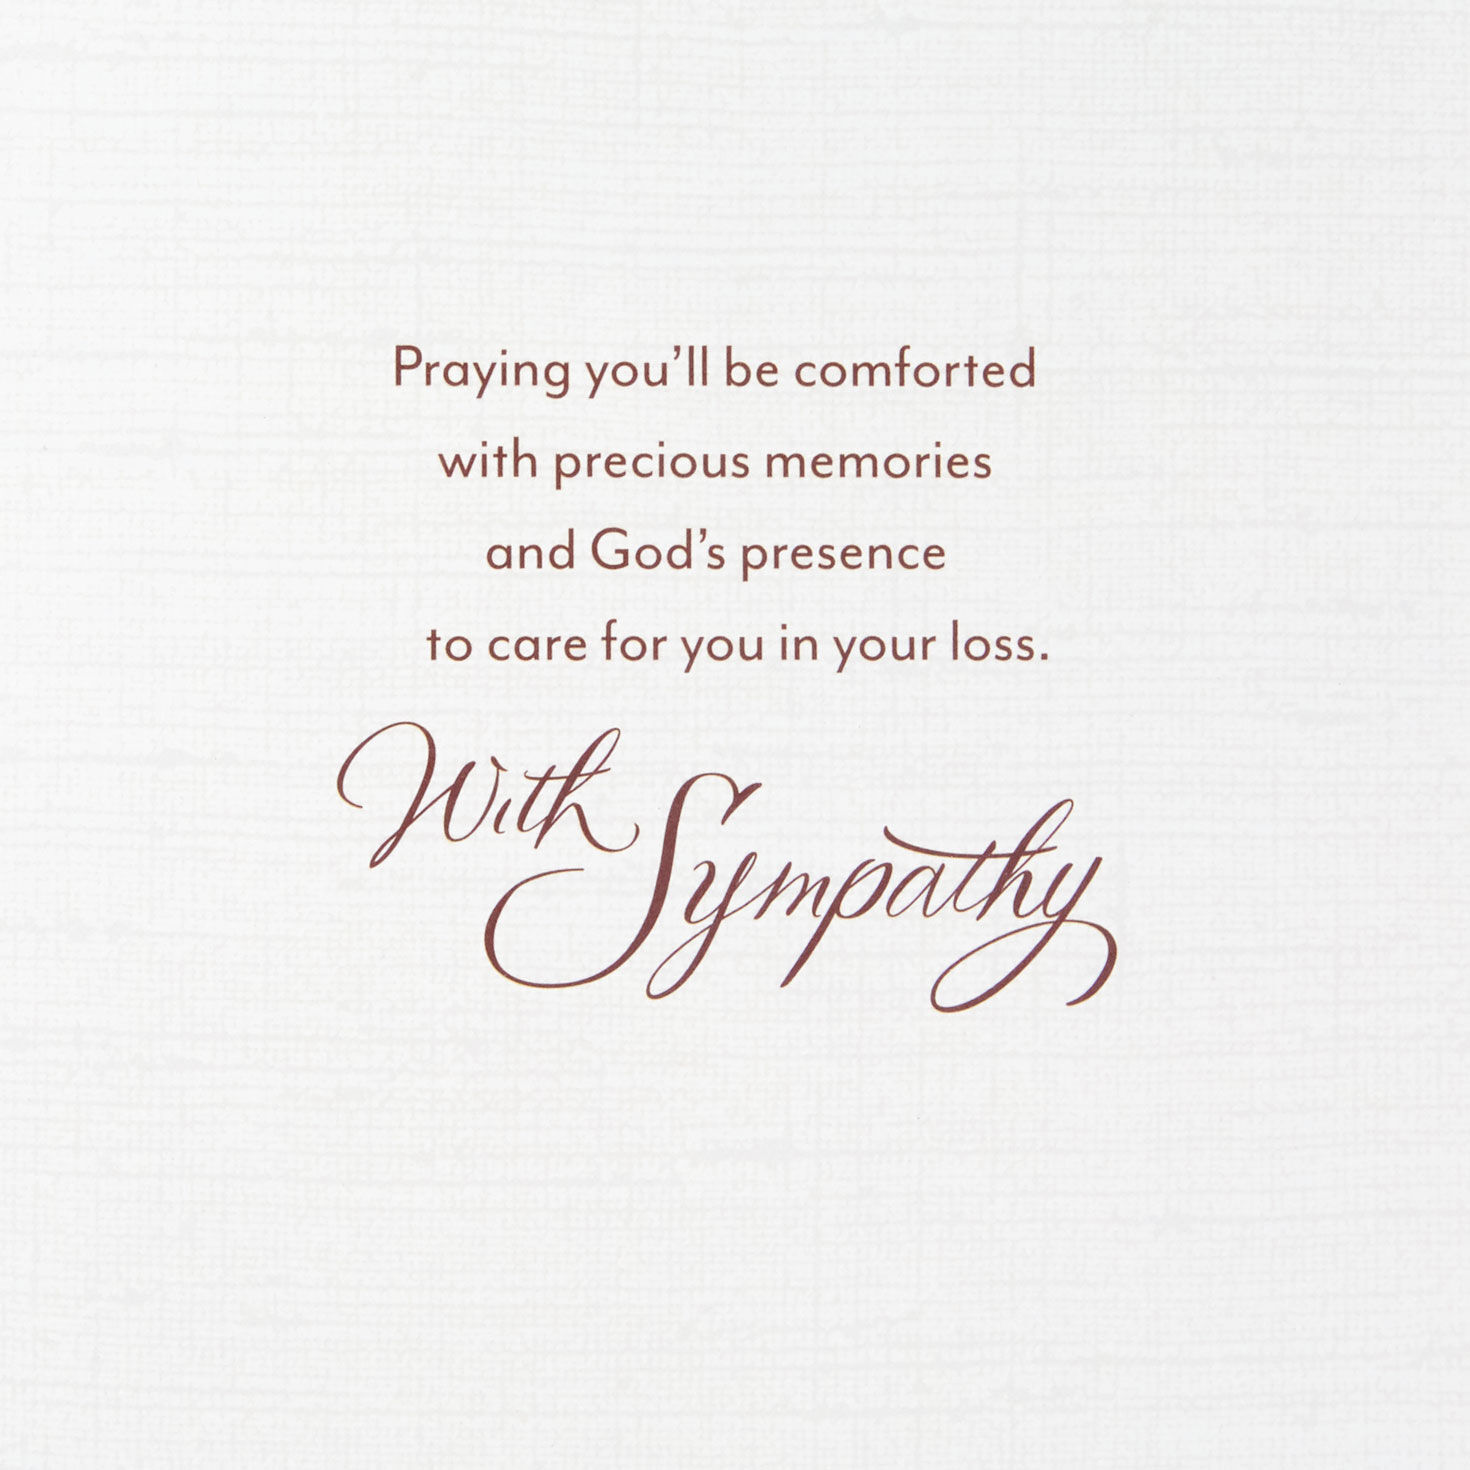 A Journey Remembered Religious Sympathy Card for only USD 3.99 | Hallmark